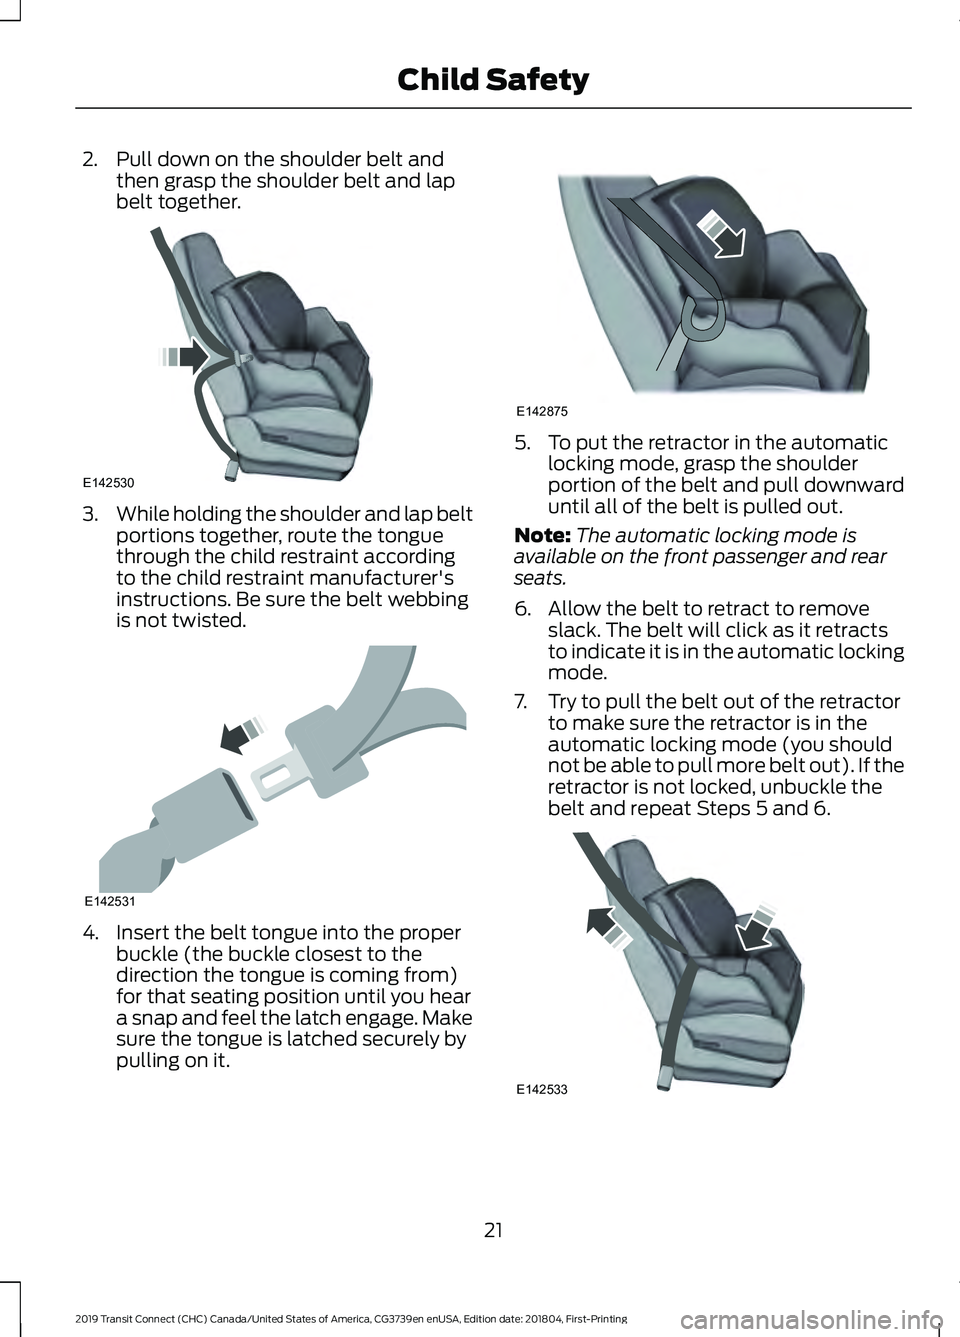 FORD TRANSIT CONNECT 2019  Owners Manual 2. Pull down on the shoulder belt and
then grasp the shoulder belt and lap
belt together. 3.
While holding the shoulder and lap belt
portions together, route the tongue
through the child restraint acc